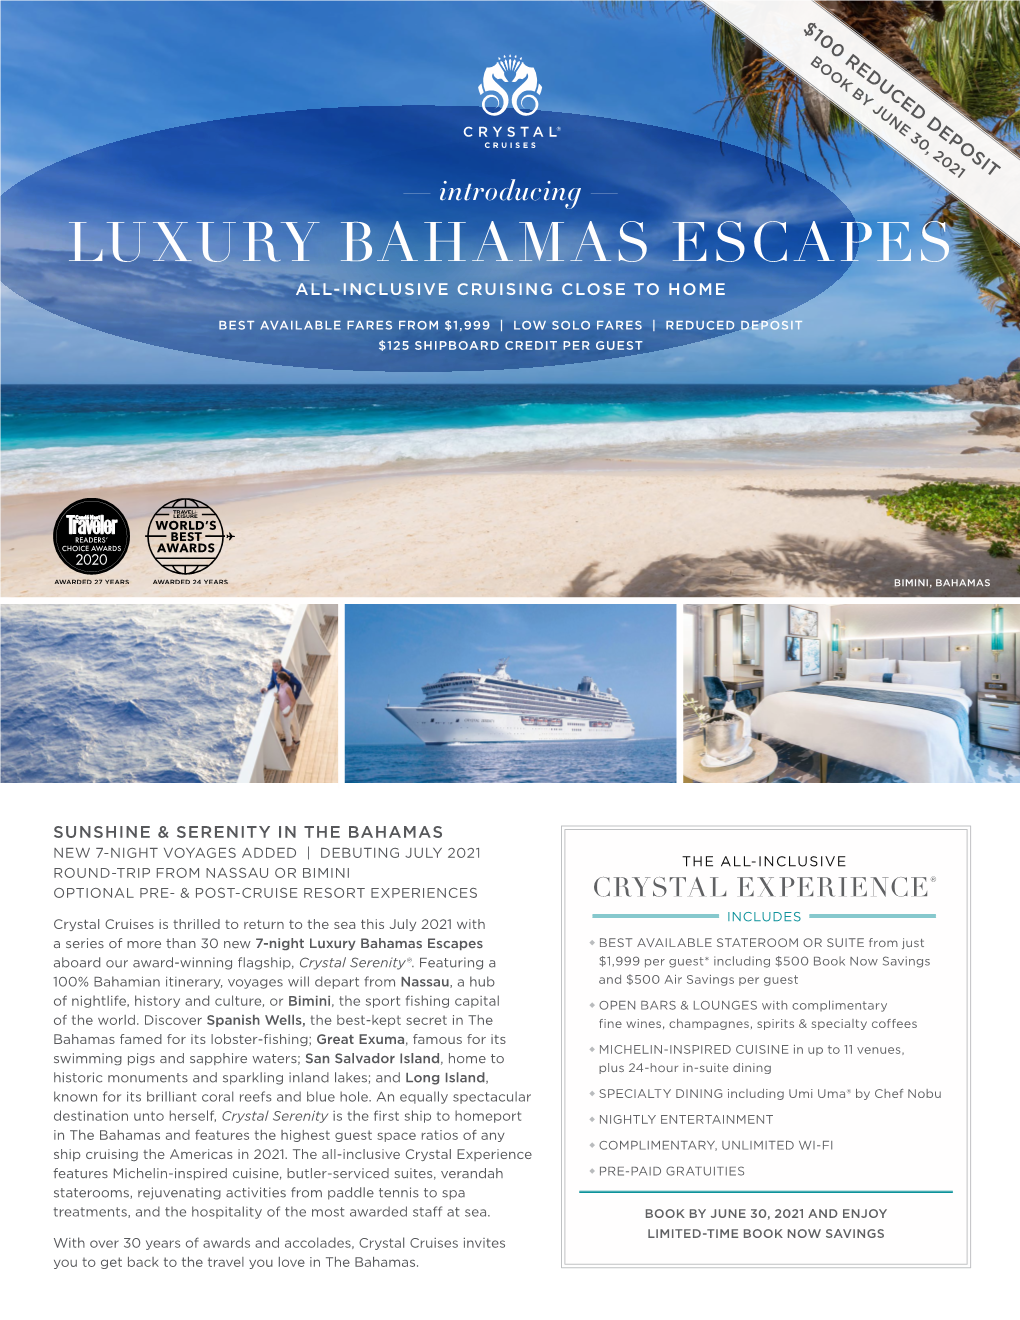 Luxury Bahamas Escapes All-Inclusive Cruising Close to Home